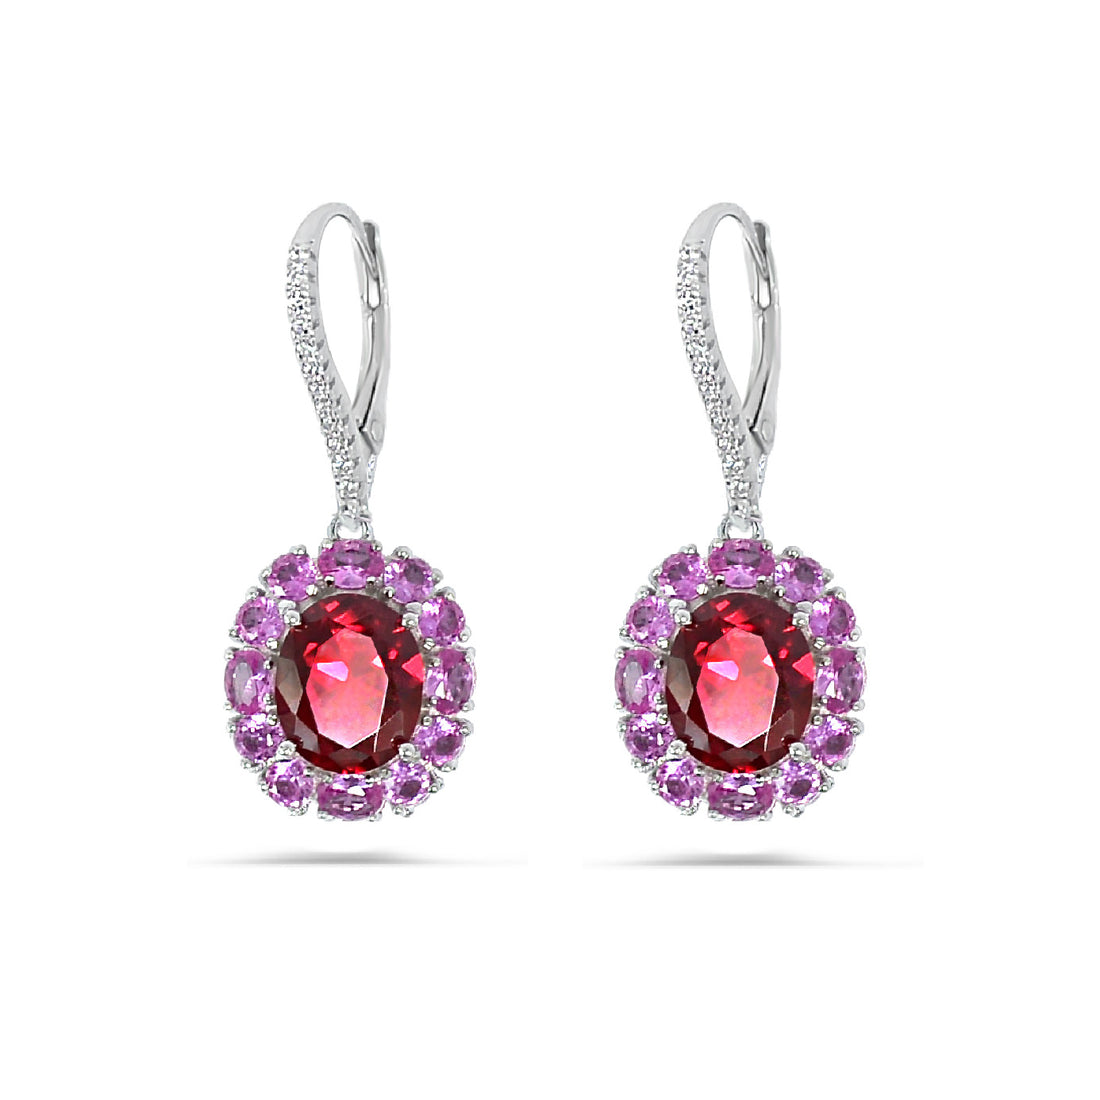 Stunning 925 sterling silver hanging latch back lock earrings - with high quality red zircon stones